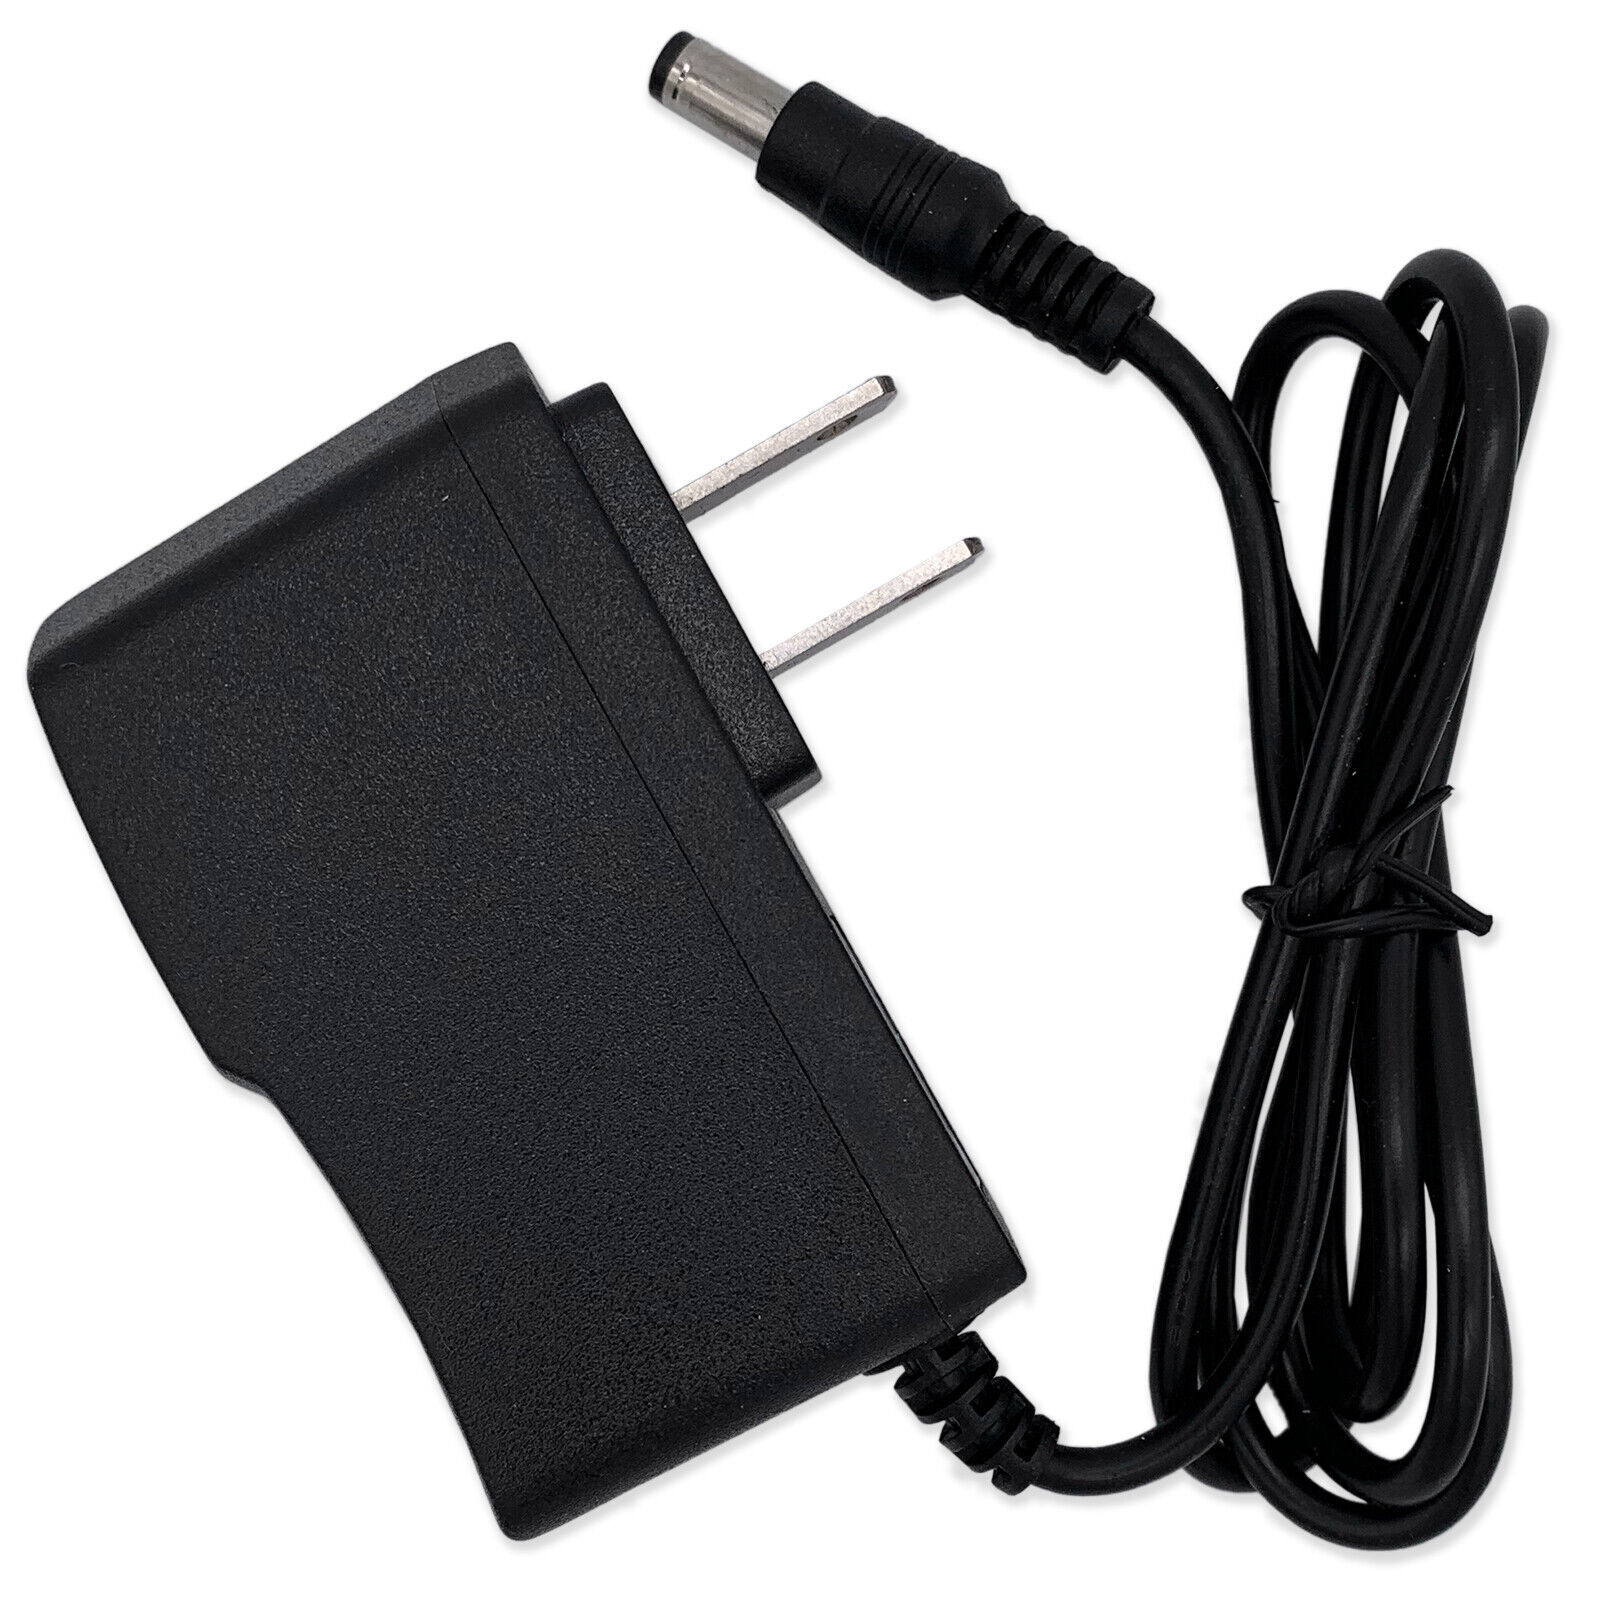 Primary image for 9V AC/DC Adapter Charger For Brother AD-24 AD-24ES LABEL PRINTER Power Supply